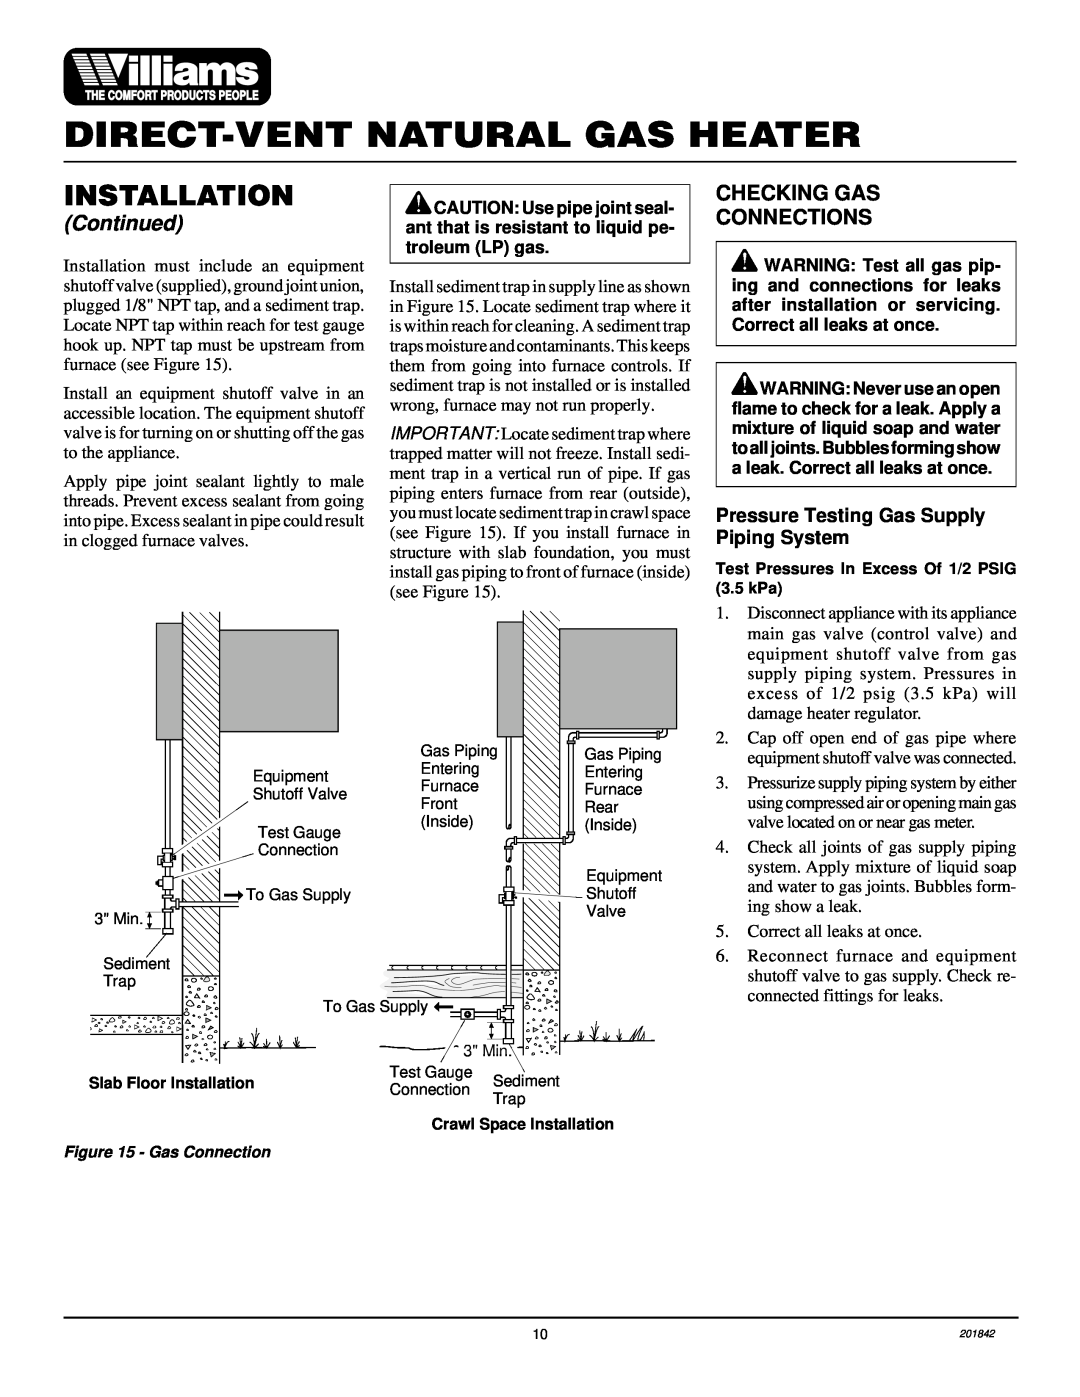 Williams 2503532, 4003532 Direct-Ventnatural Gas Heater, Installation, Continued, Checking Gas Connections 